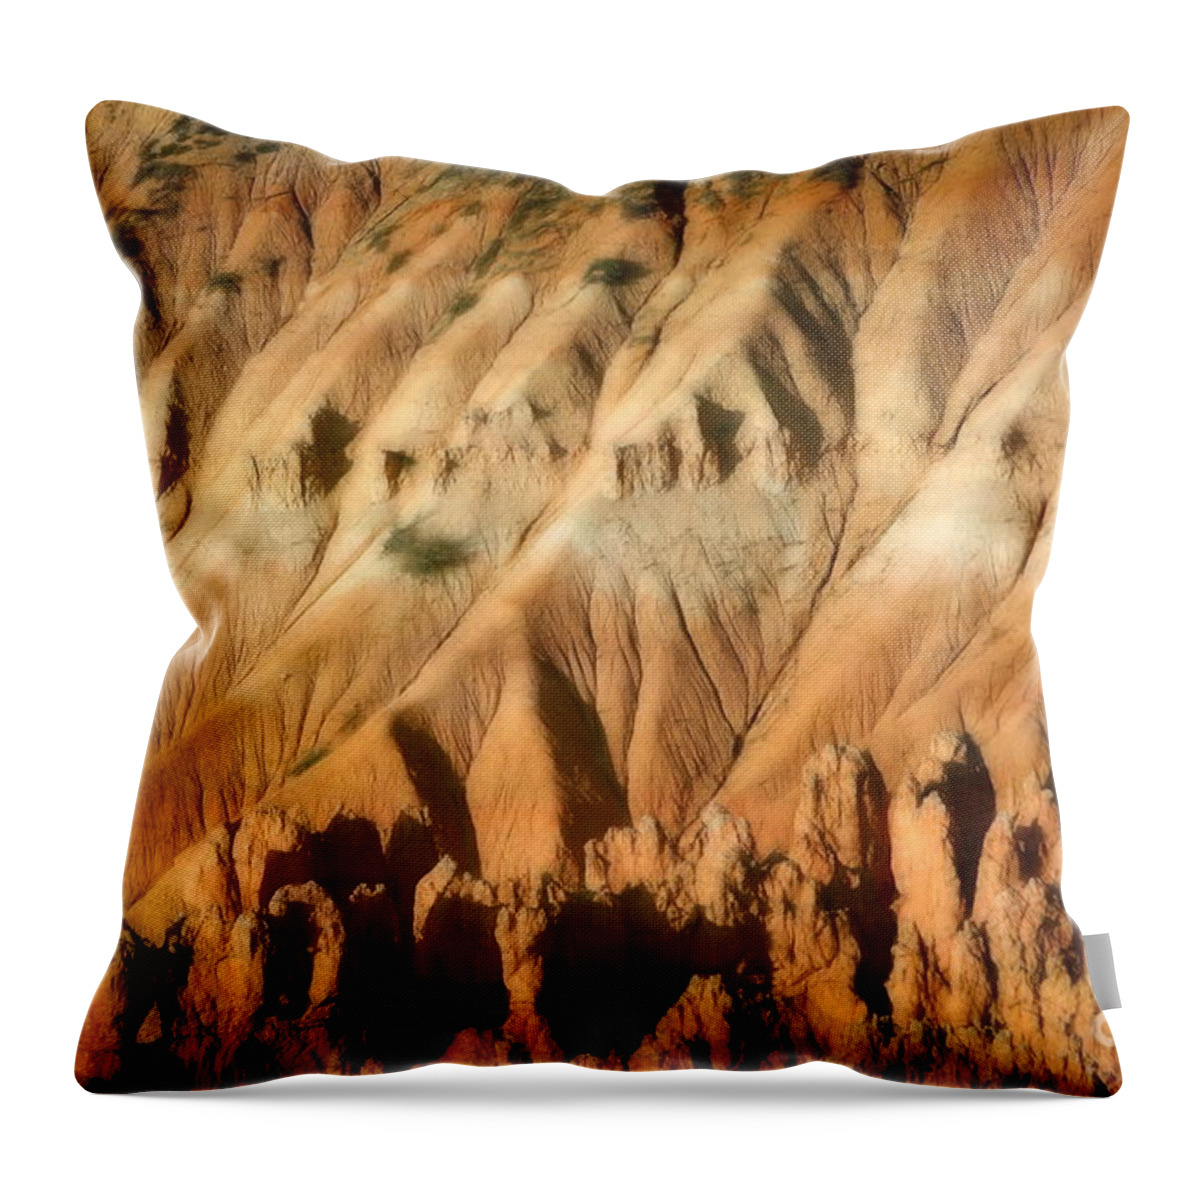 Bryce Canyon Throw Pillow featuring the photograph Nature For Your Eyes Bryce Canyon by Chuck Kuhn